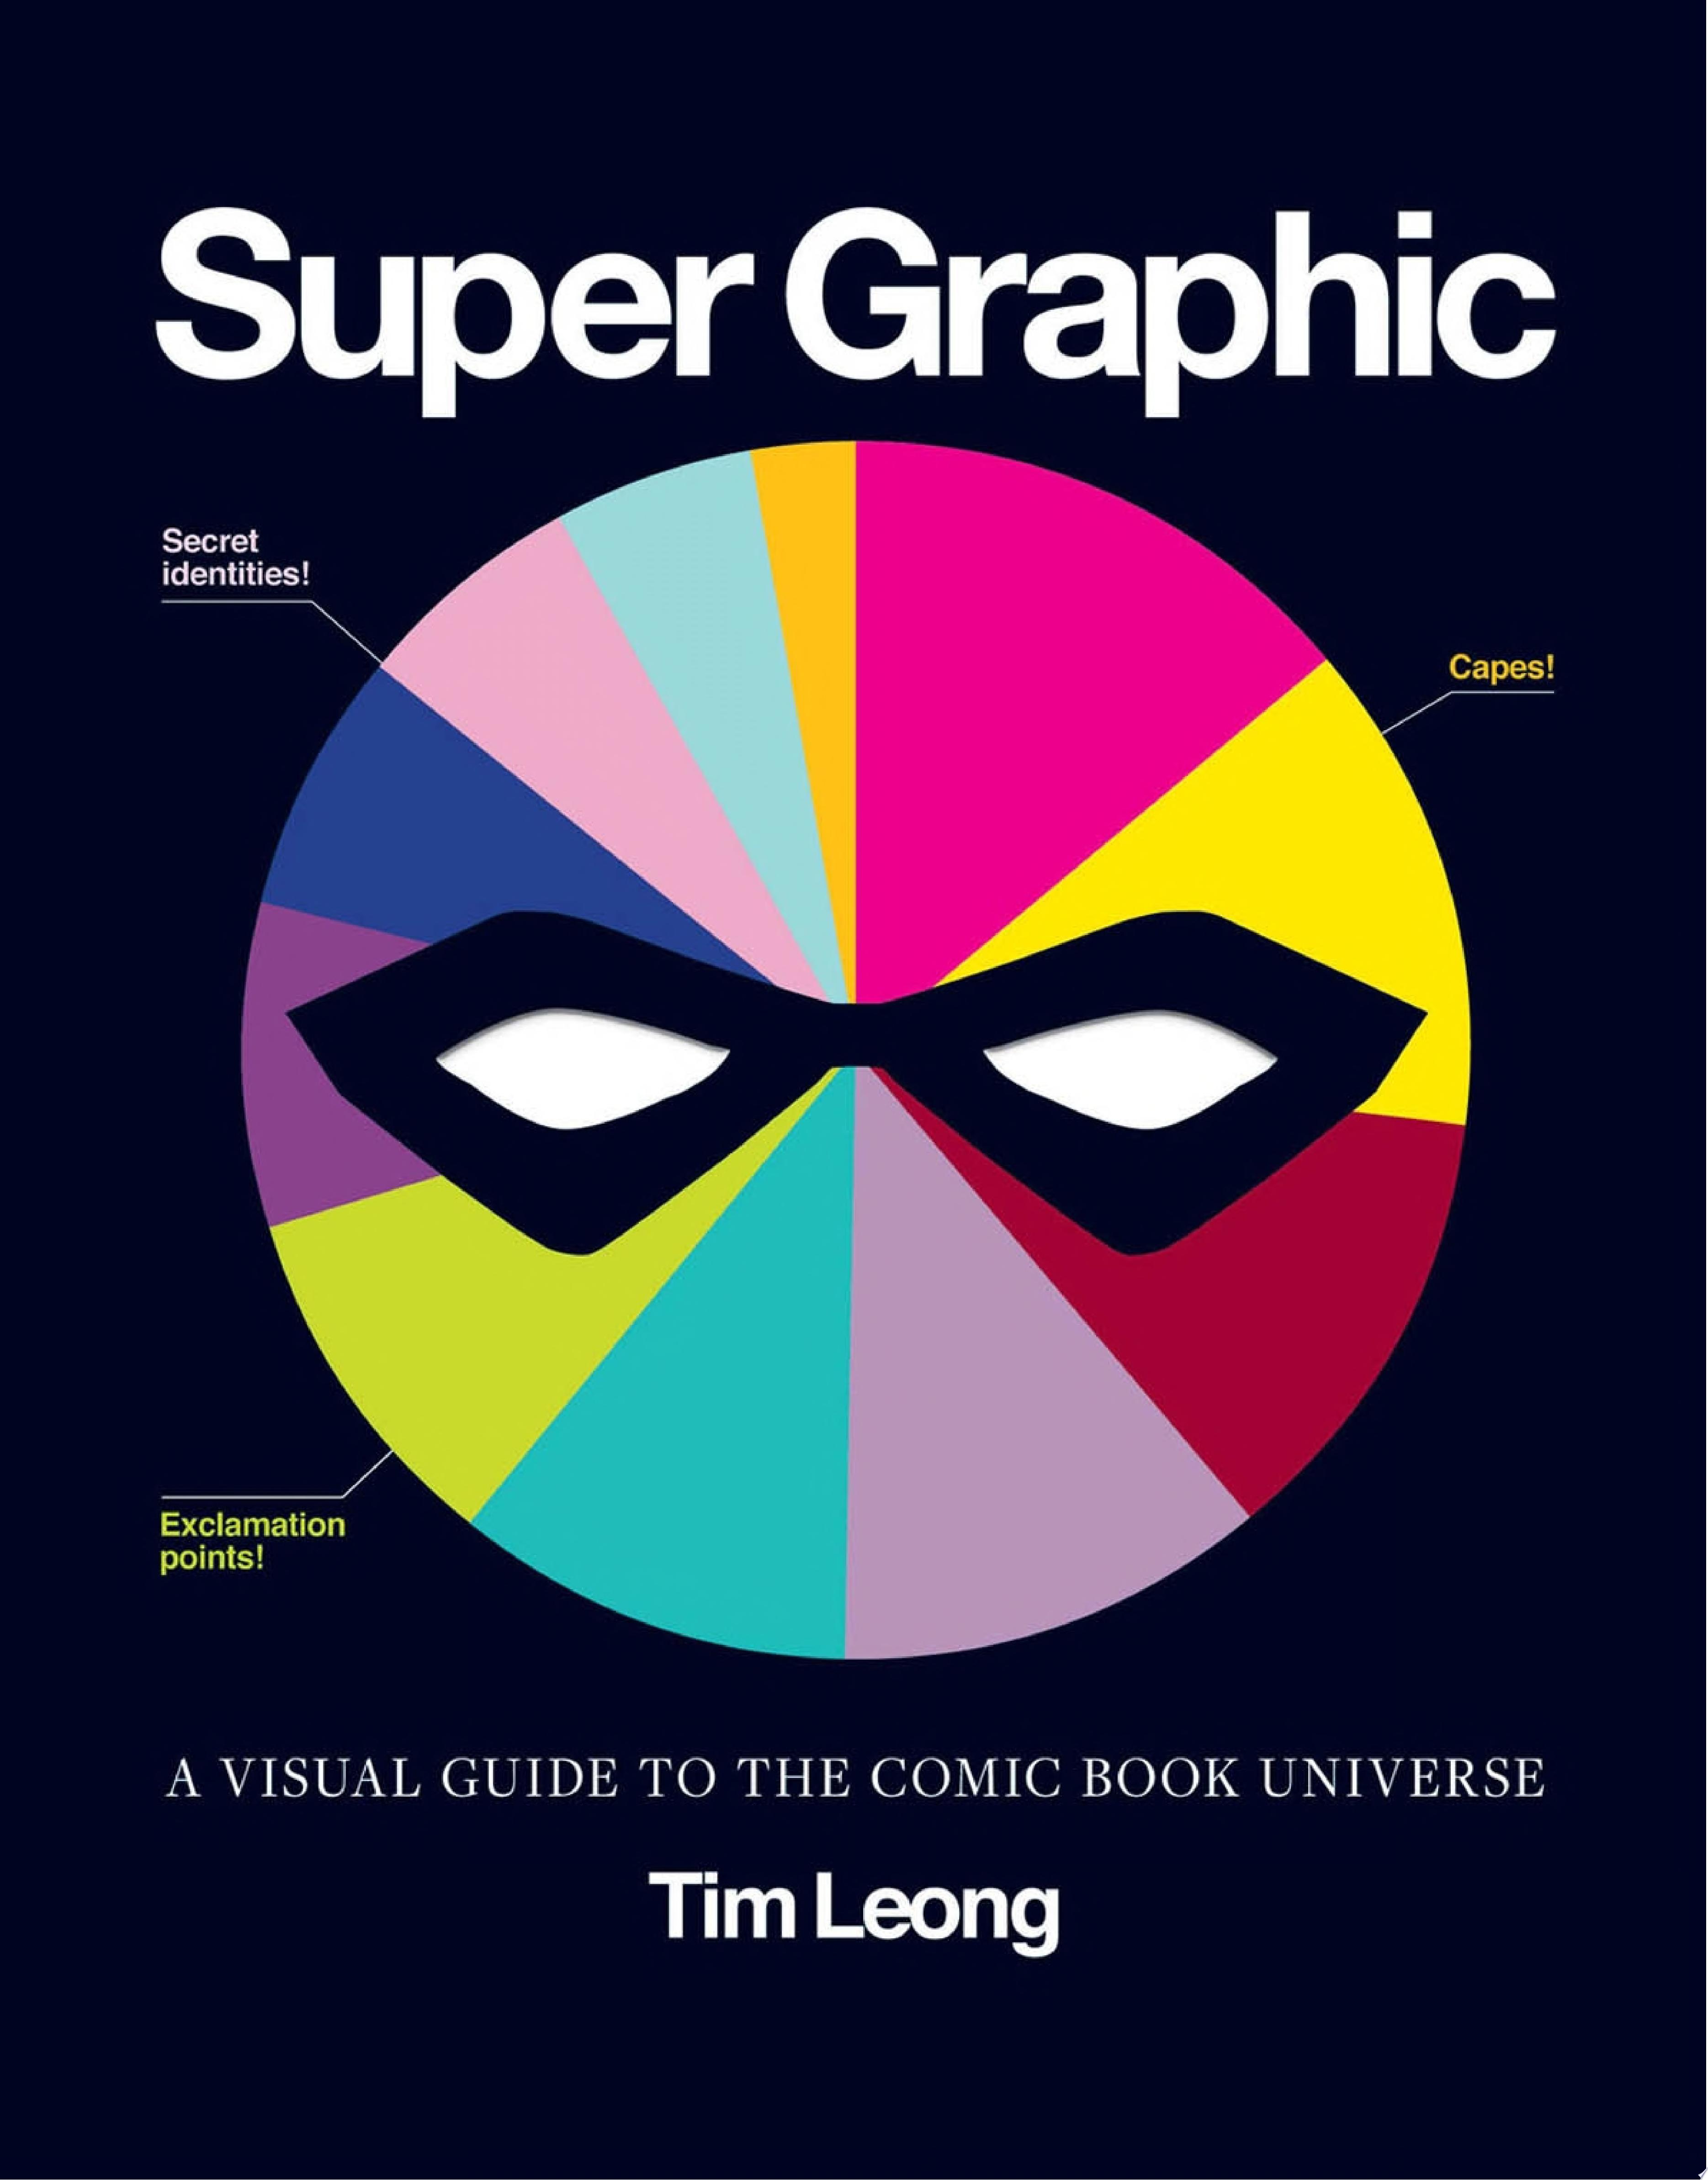 Image for "Super Graphic"